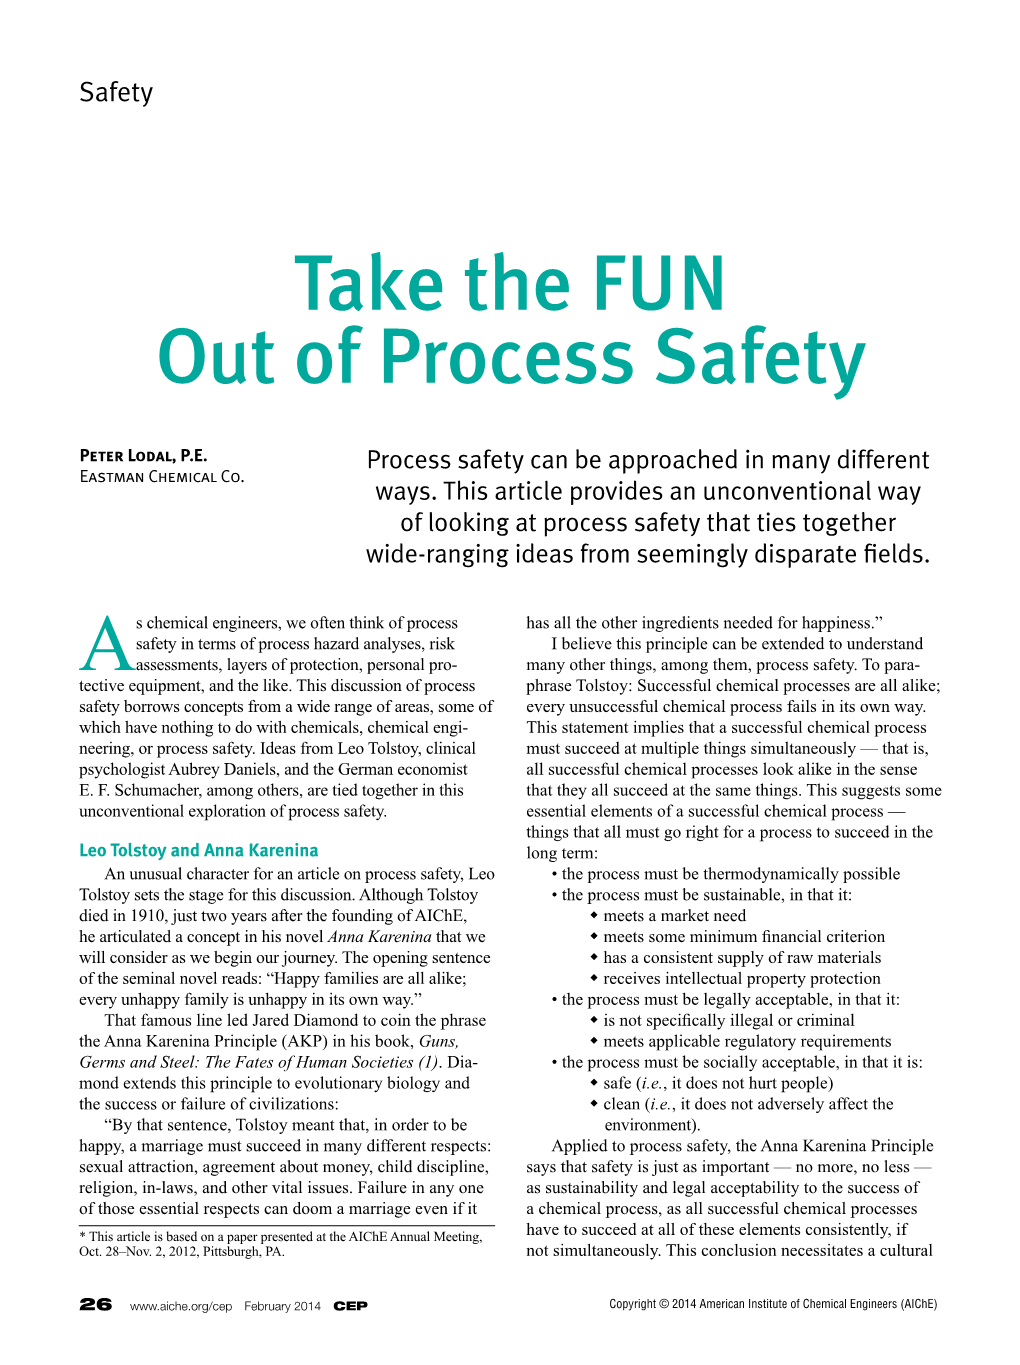 Take the FUN out of Process Safety